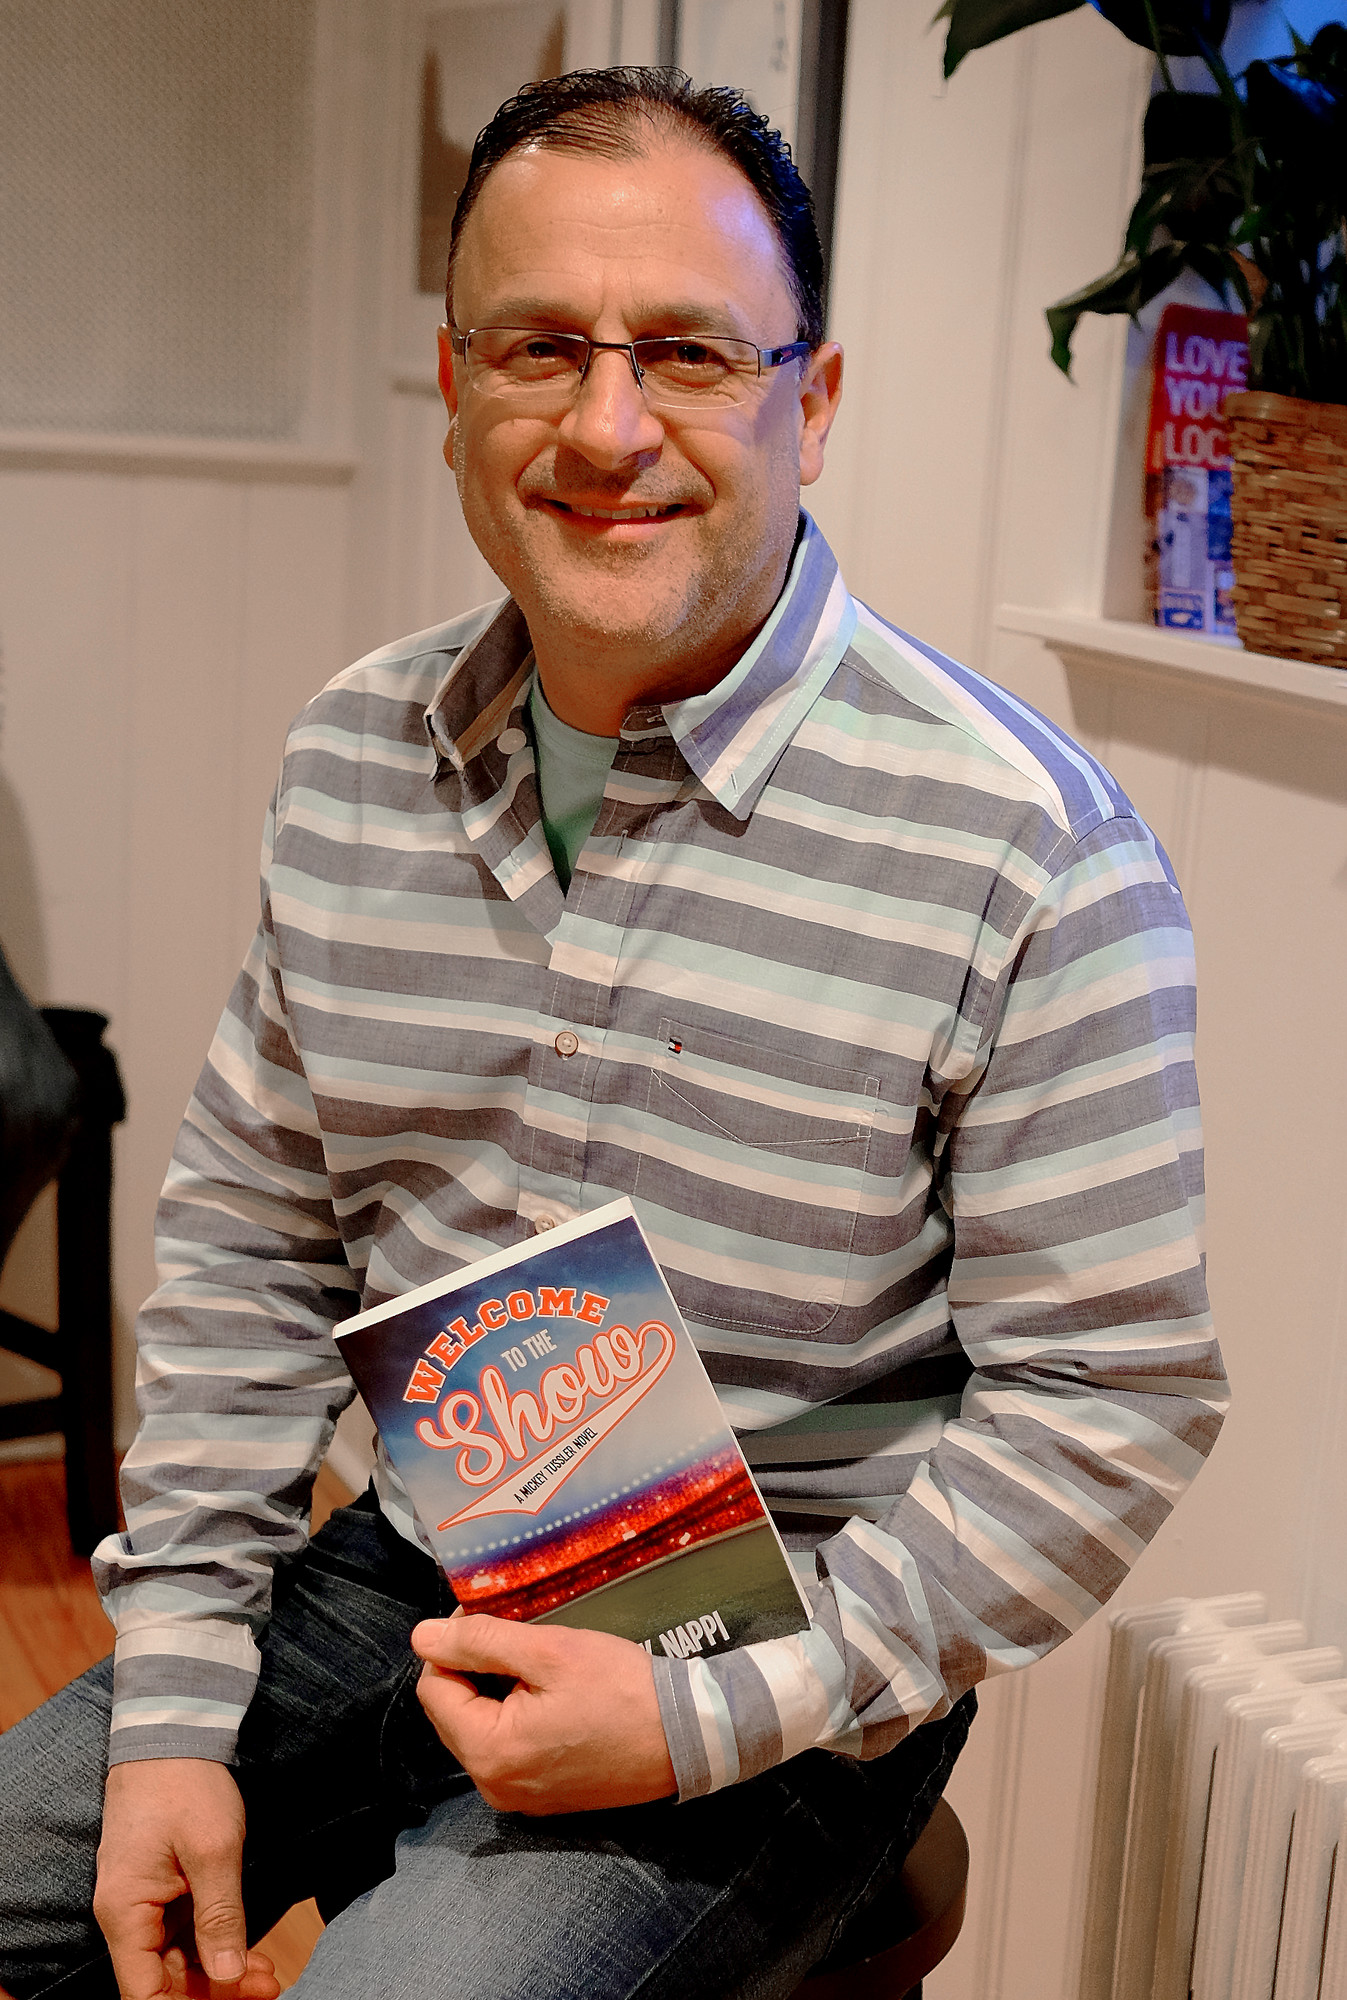 Frank Nappi showed off “Welcome to the Show” the latest book in his Mickey Tussler series, at Turn of the Corkscrew.